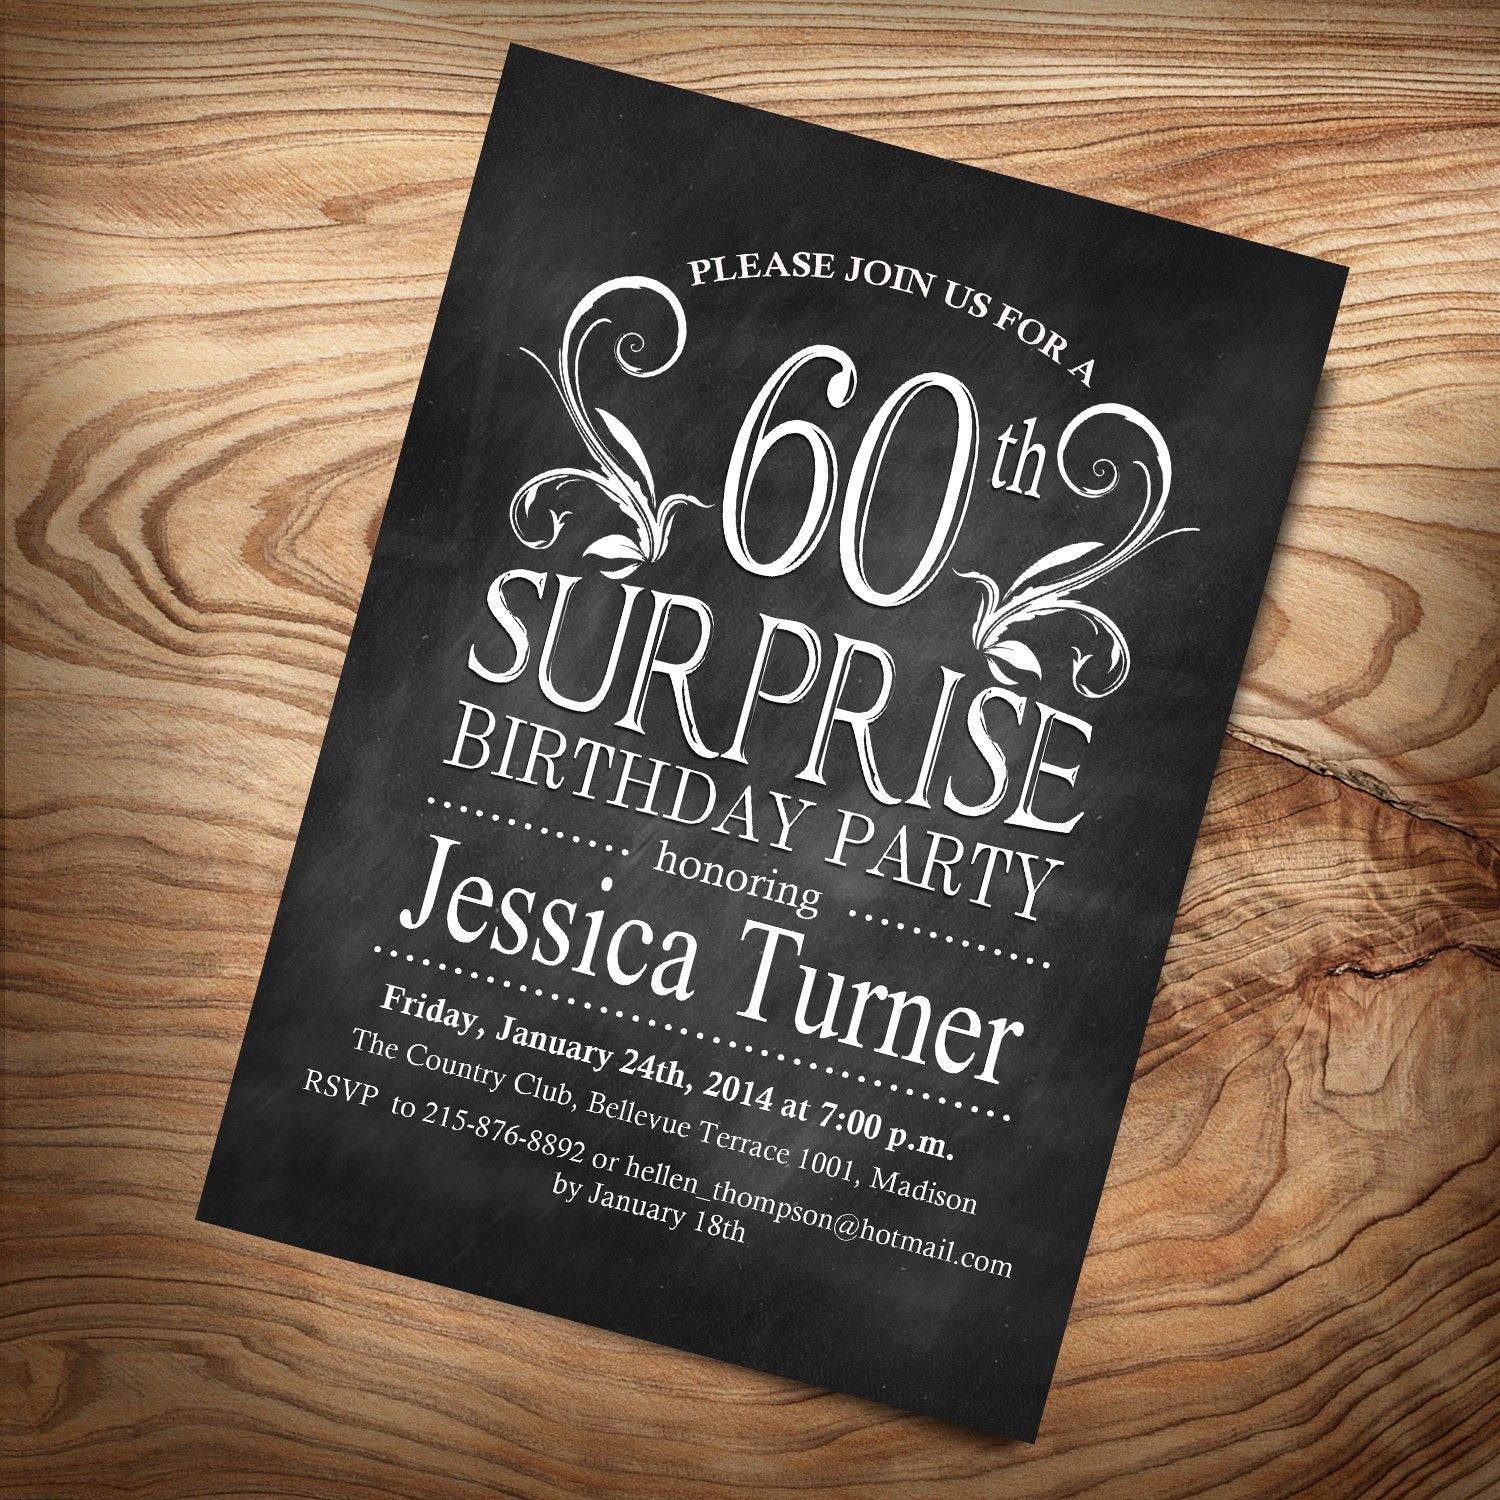 Surprise 60th Birthday Party Invitations
 Surprise 60th Birthday Invitation Any Age Digital